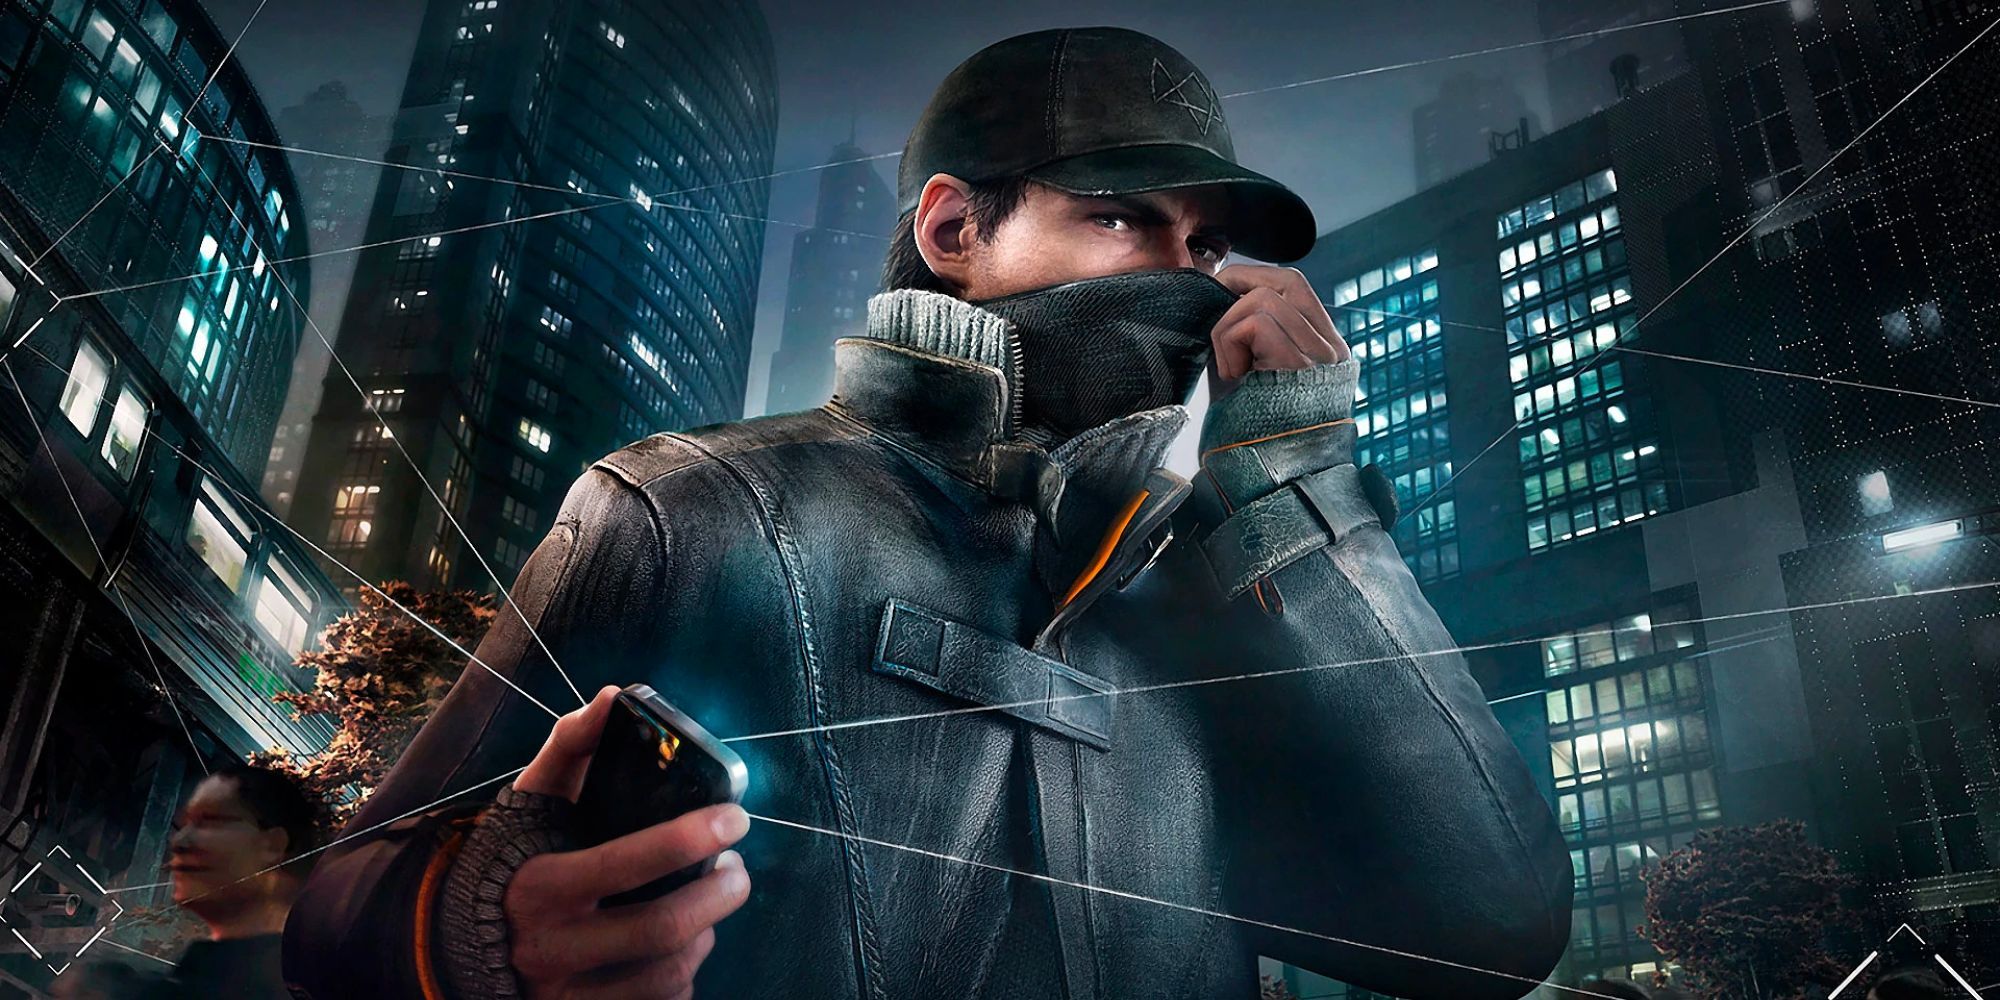 Aiden Pearce with hacking device and mask